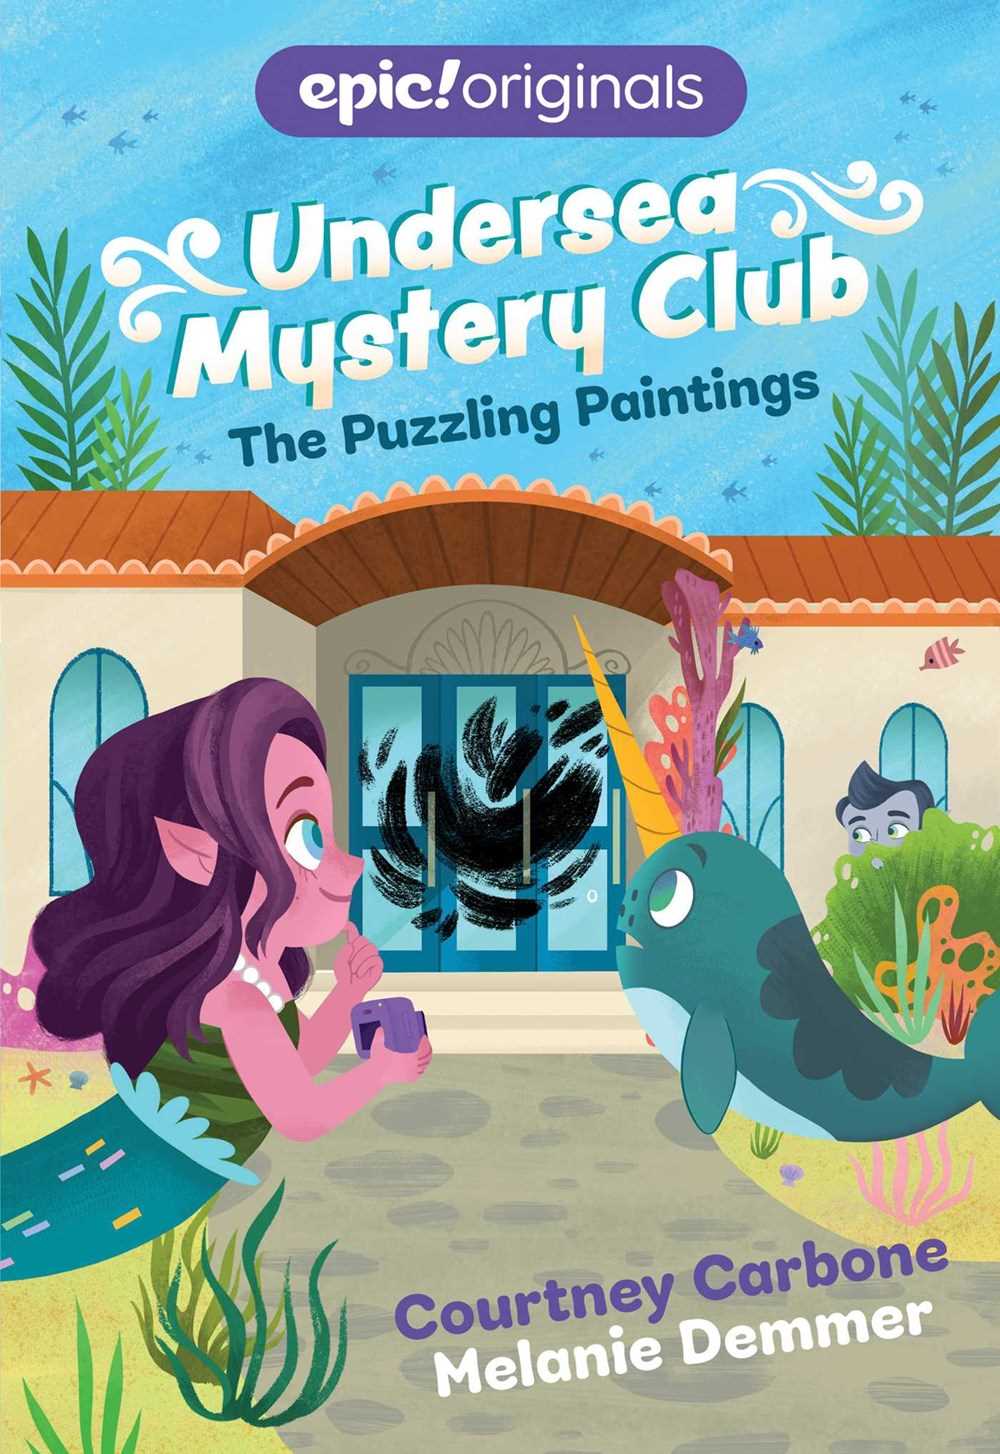 Undersea Mystery Club #03: The Puzzling Paintings